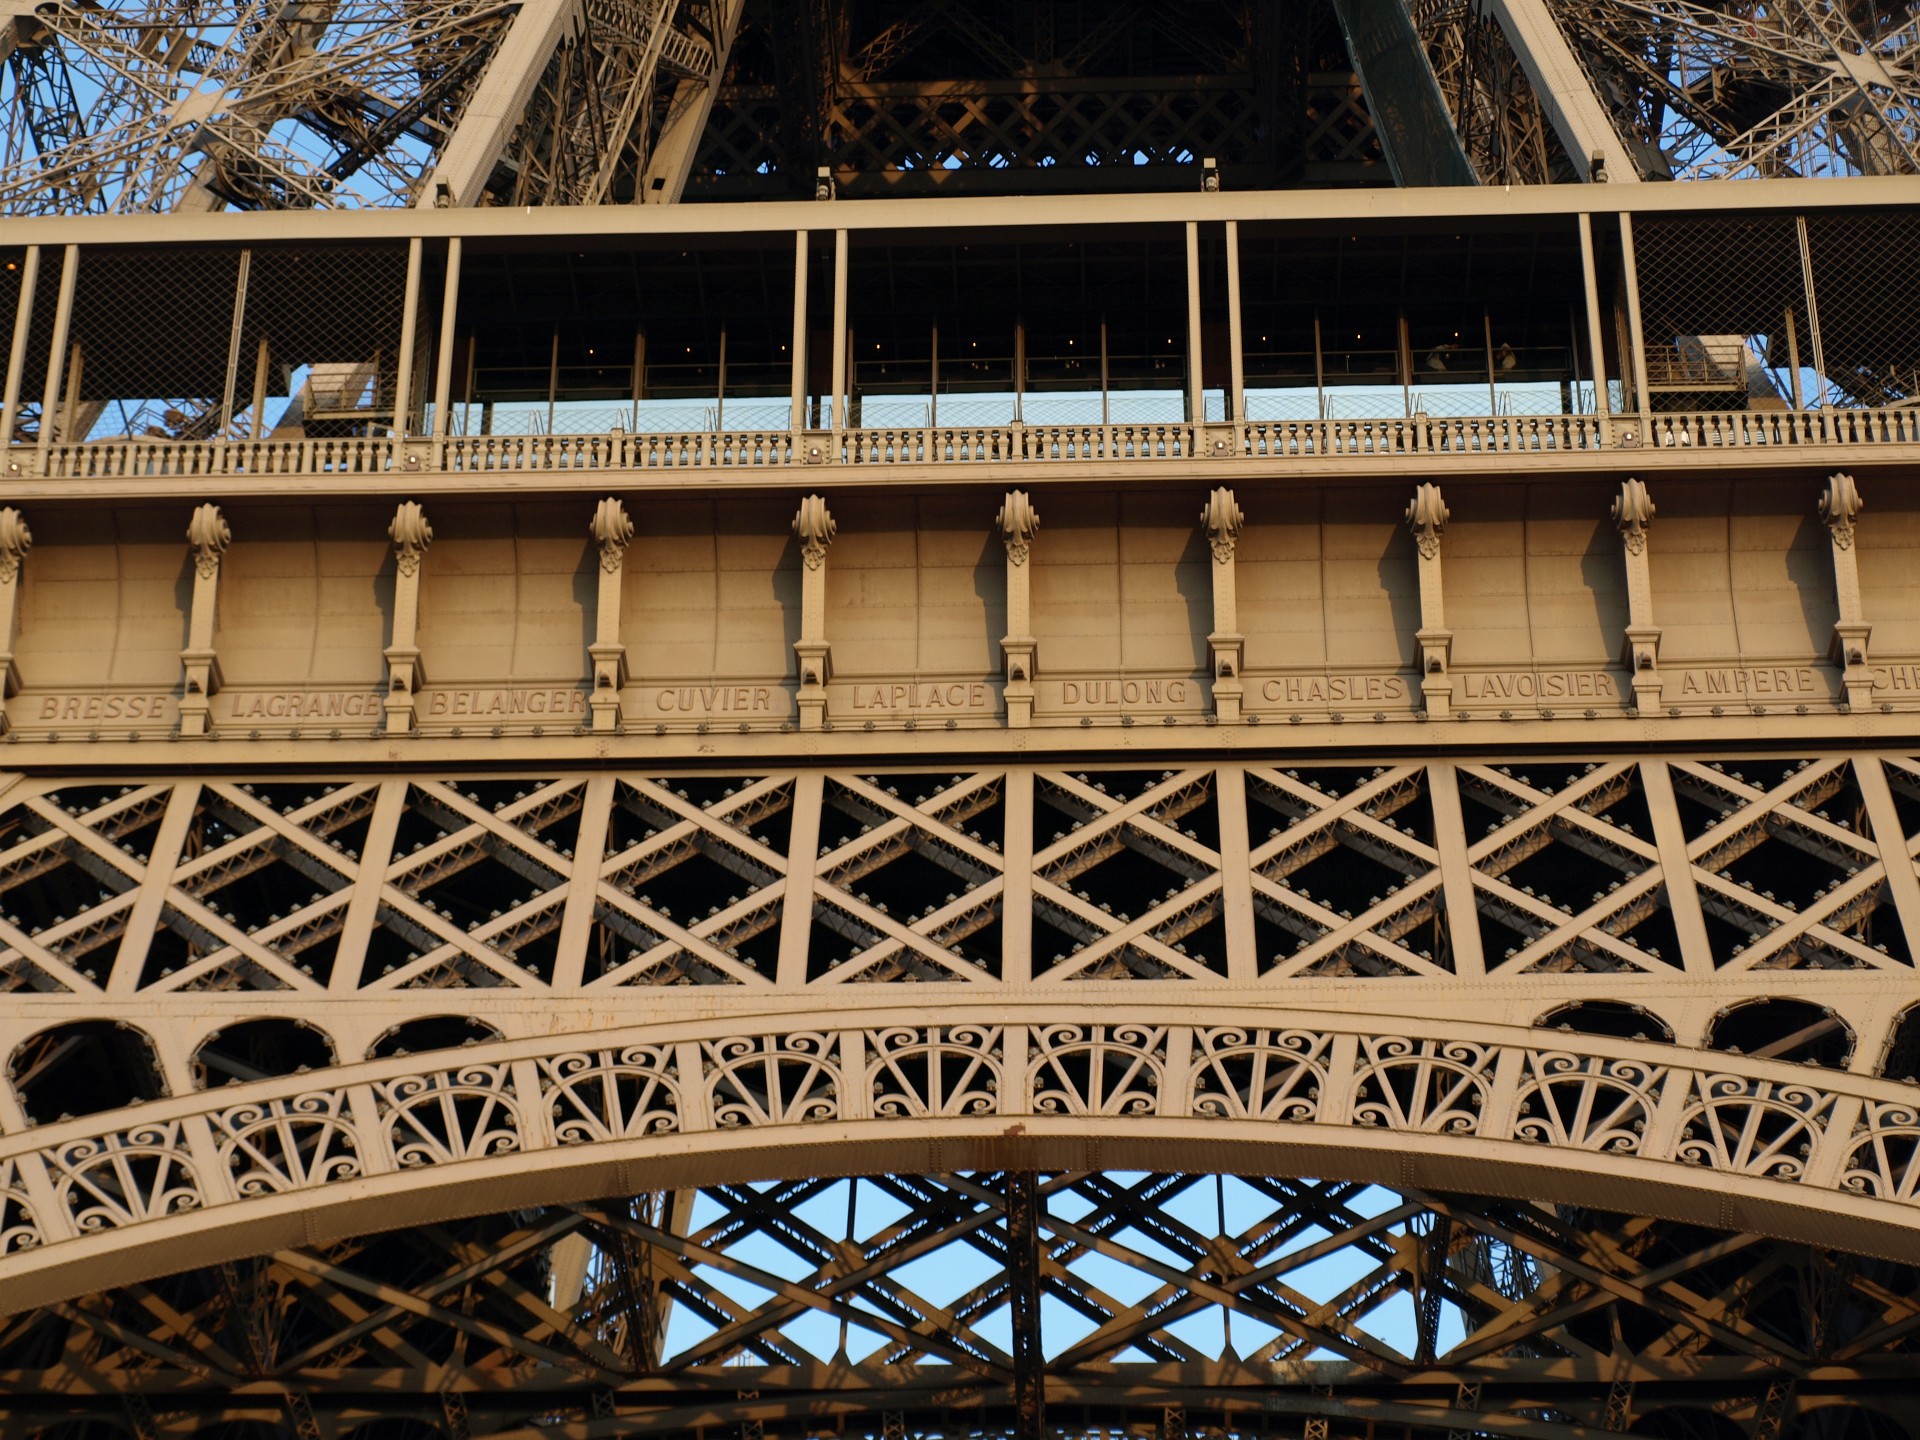 Some of the Names of the French Notables Etched on the Tour Eiffel